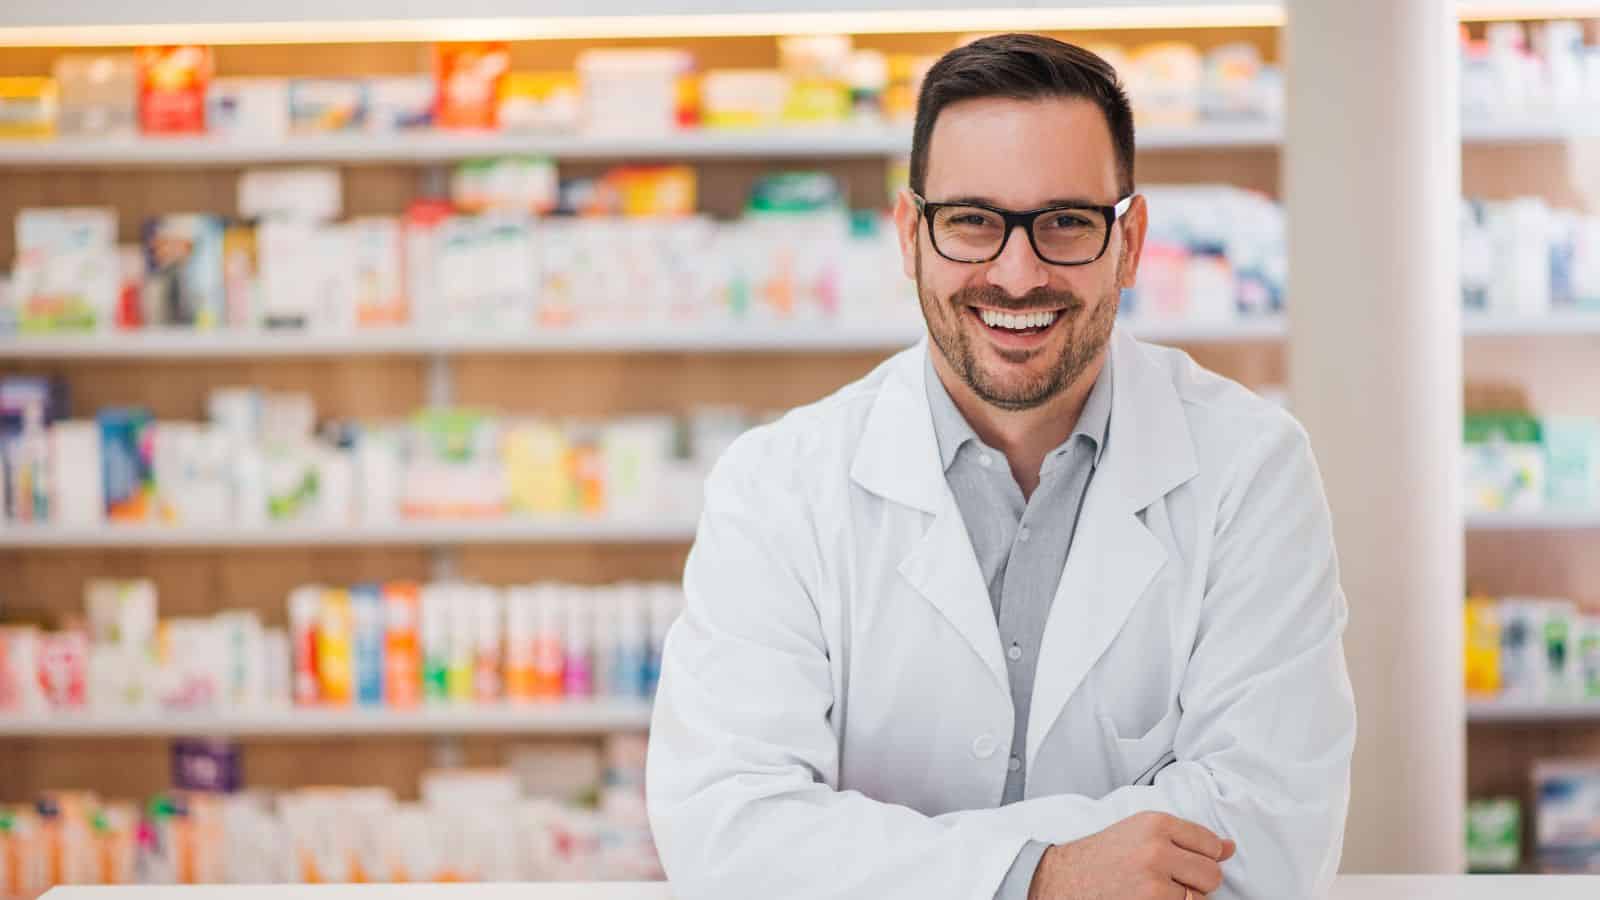 <p>You may think pharmacists only dispense medications, but they also offer crucial health advice to patients. Their in-depth knowledge and training make them super valuable in healthcare, so they often have great earning potential. You'll find many pharmacists working in hospitals, clinics, and retail pharmacies, enjoying stable and well-paid careers.</p>